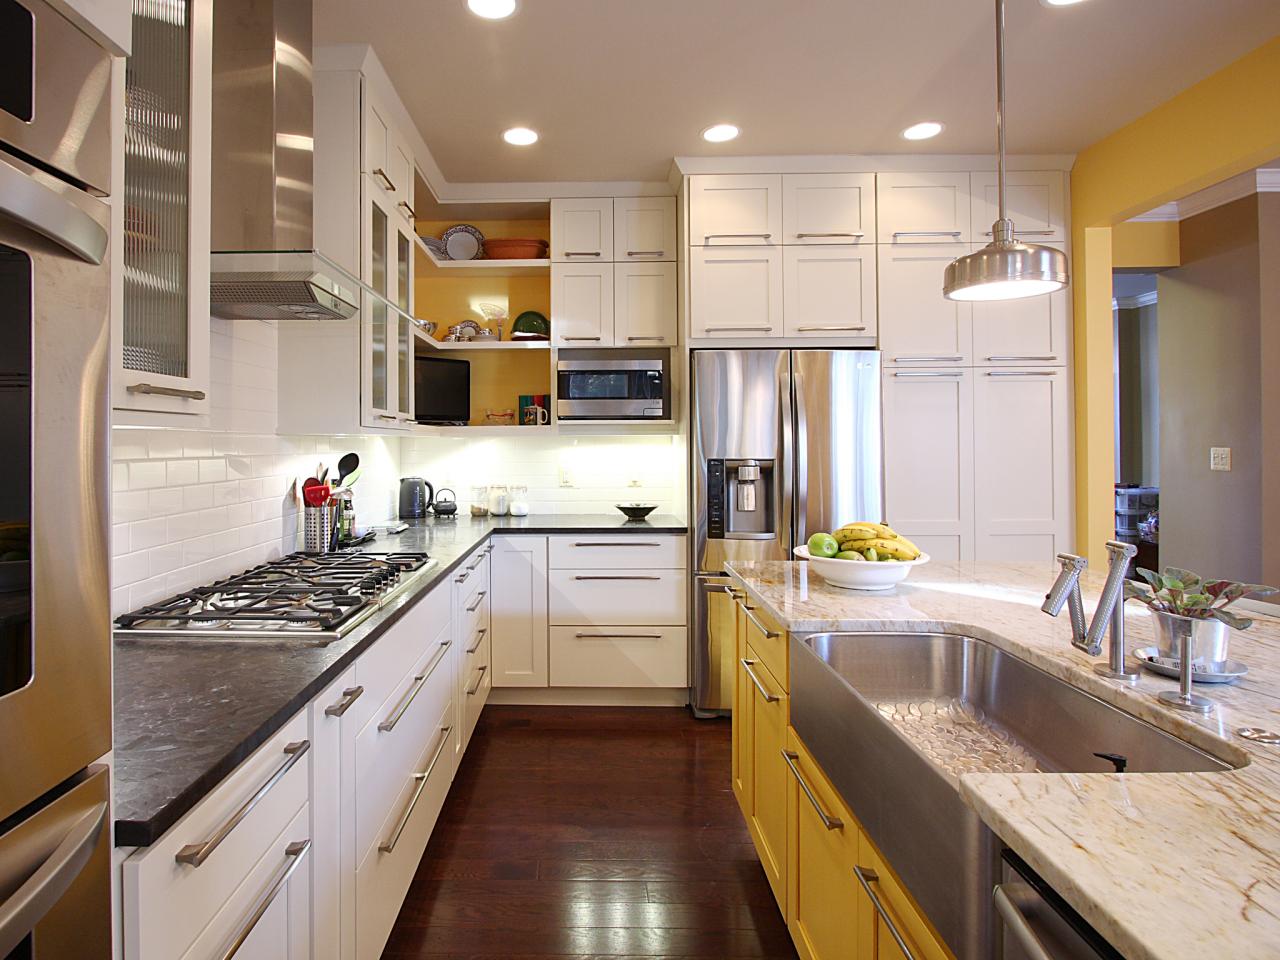 Black Kitchen Cabinets Pictures Ideas Tips From HGTV HGTV